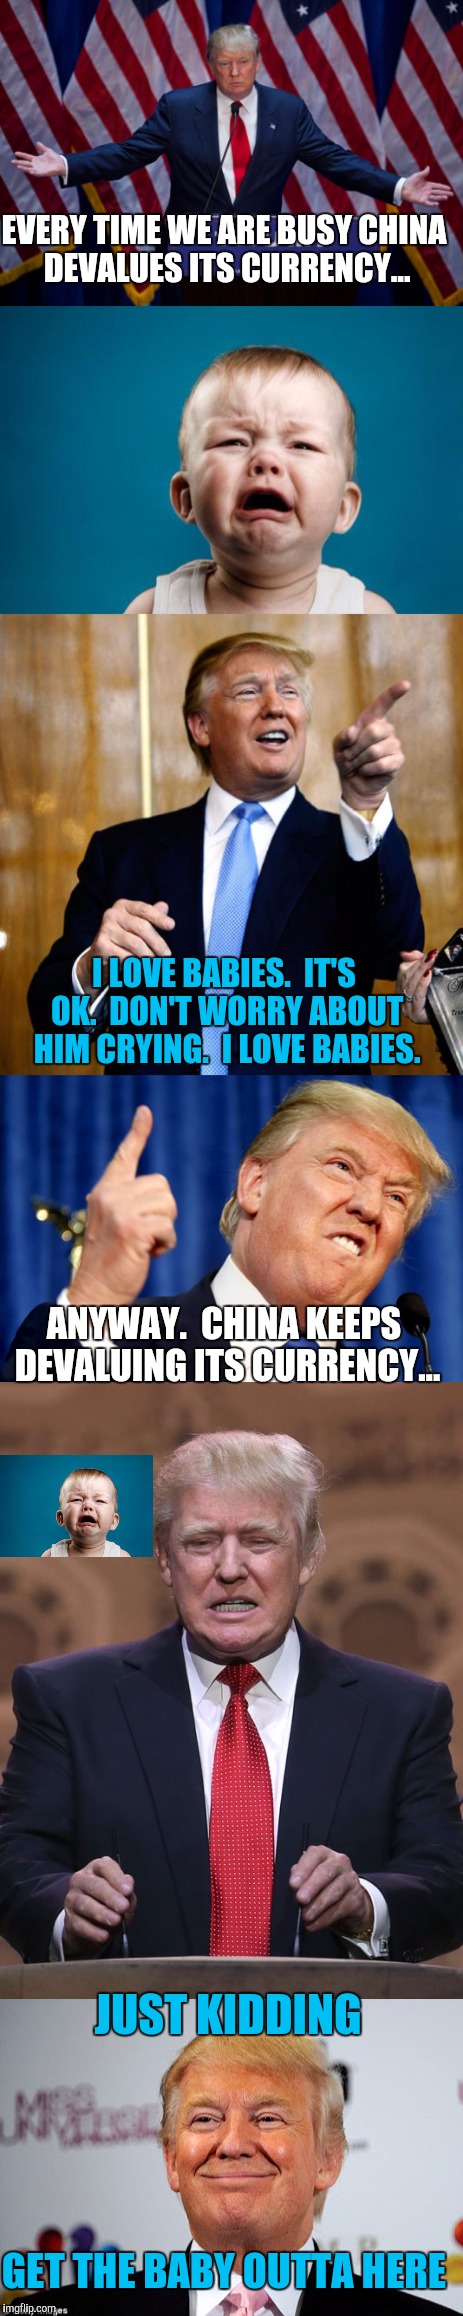 Trump rally, live from Virginia. | EVERY TIME WE ARE BUSY CHINA DEVALUES ITS CURRENCY... I LOVE BABIES.  IT'S OK.  DON'T WORRY ABOUT HIM CRYING.  I LOVE BABIES. ANYWAY.  CHINA KEEPS DEVALUING ITS CURRENCY... JUST KIDDING; GET THE BABY OUTTA HERE | image tagged in memes | made w/ Imgflip meme maker